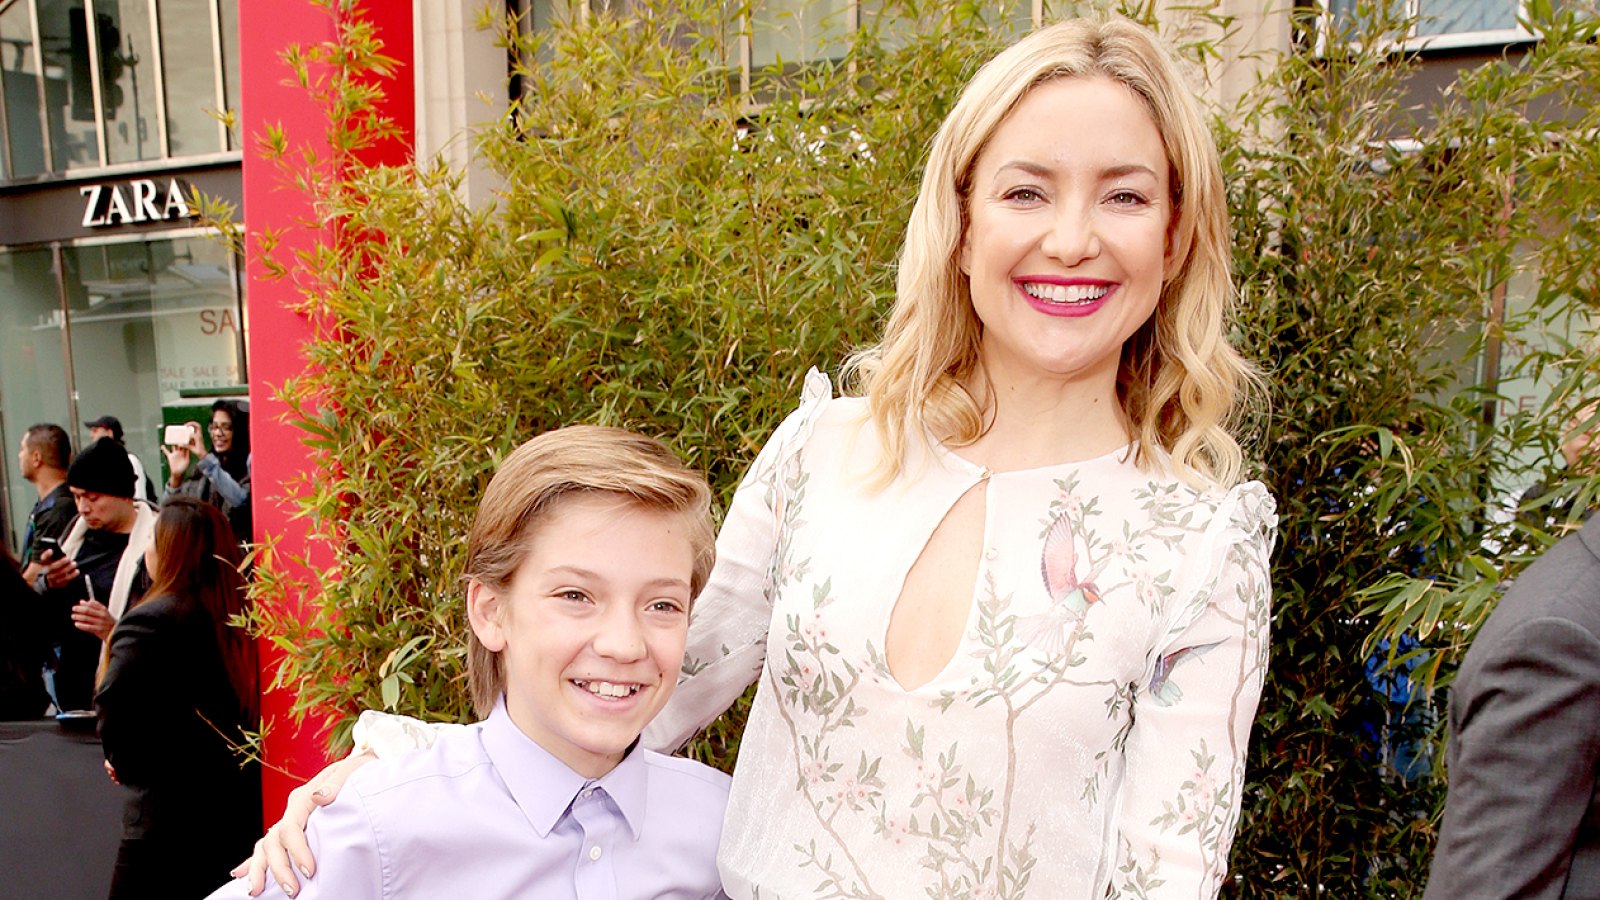 Kate Hudson with sons Ryder Robinson and Bingham Hawn Bellamy attend the premiere of DreamWorks Animation and Twentieth Century Fox's "Kung Fu Panda 3" at the TCL Chinese Theatre on January 16, 2016 in Hollywood, California.